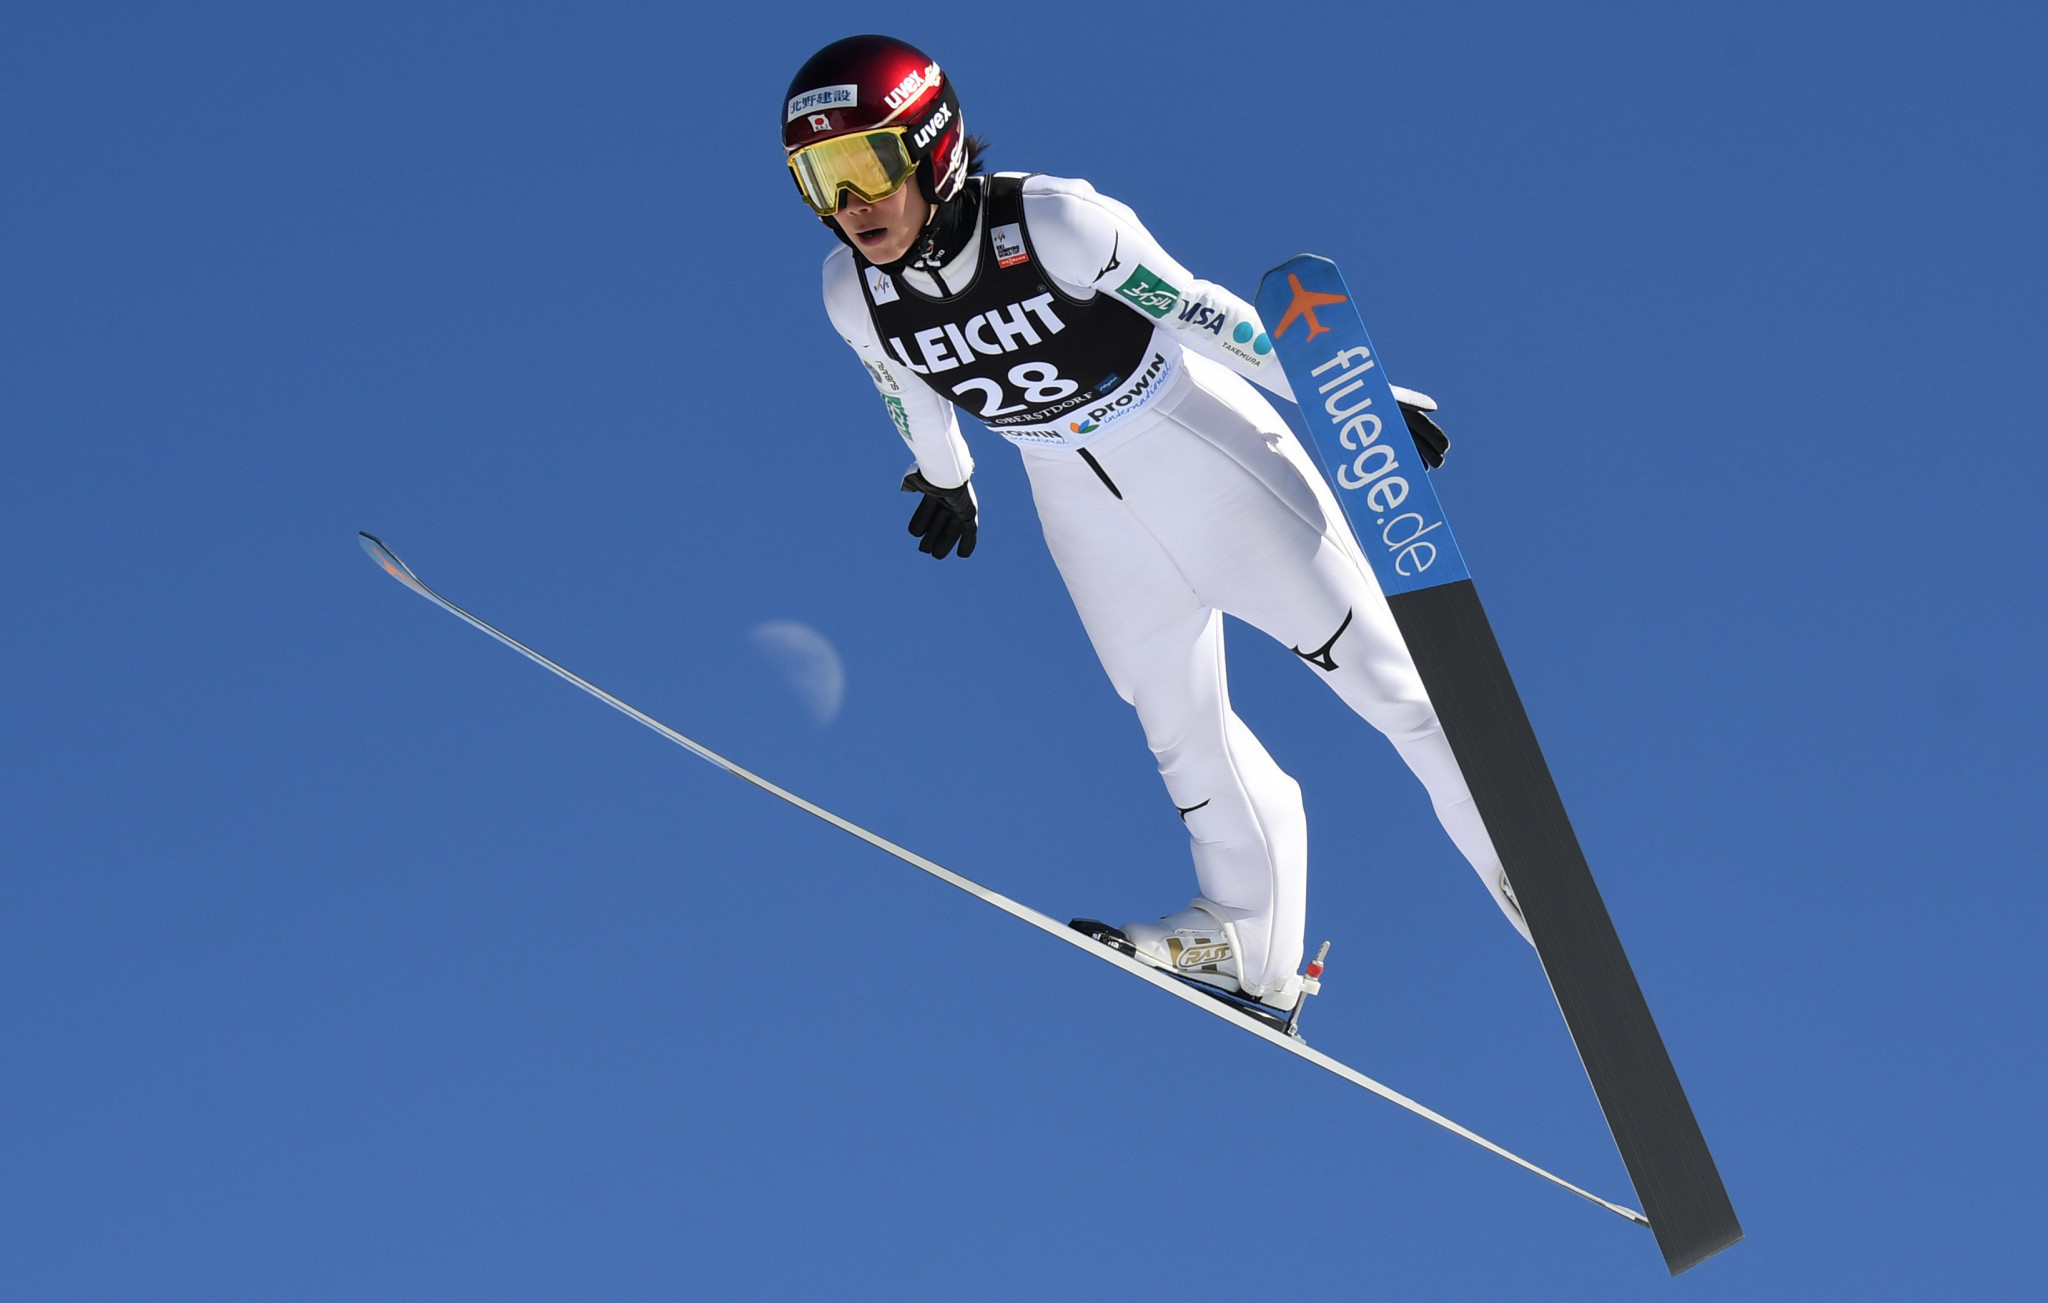 FIS confirm two new competitions added to Women's Ski Jumping World Cup